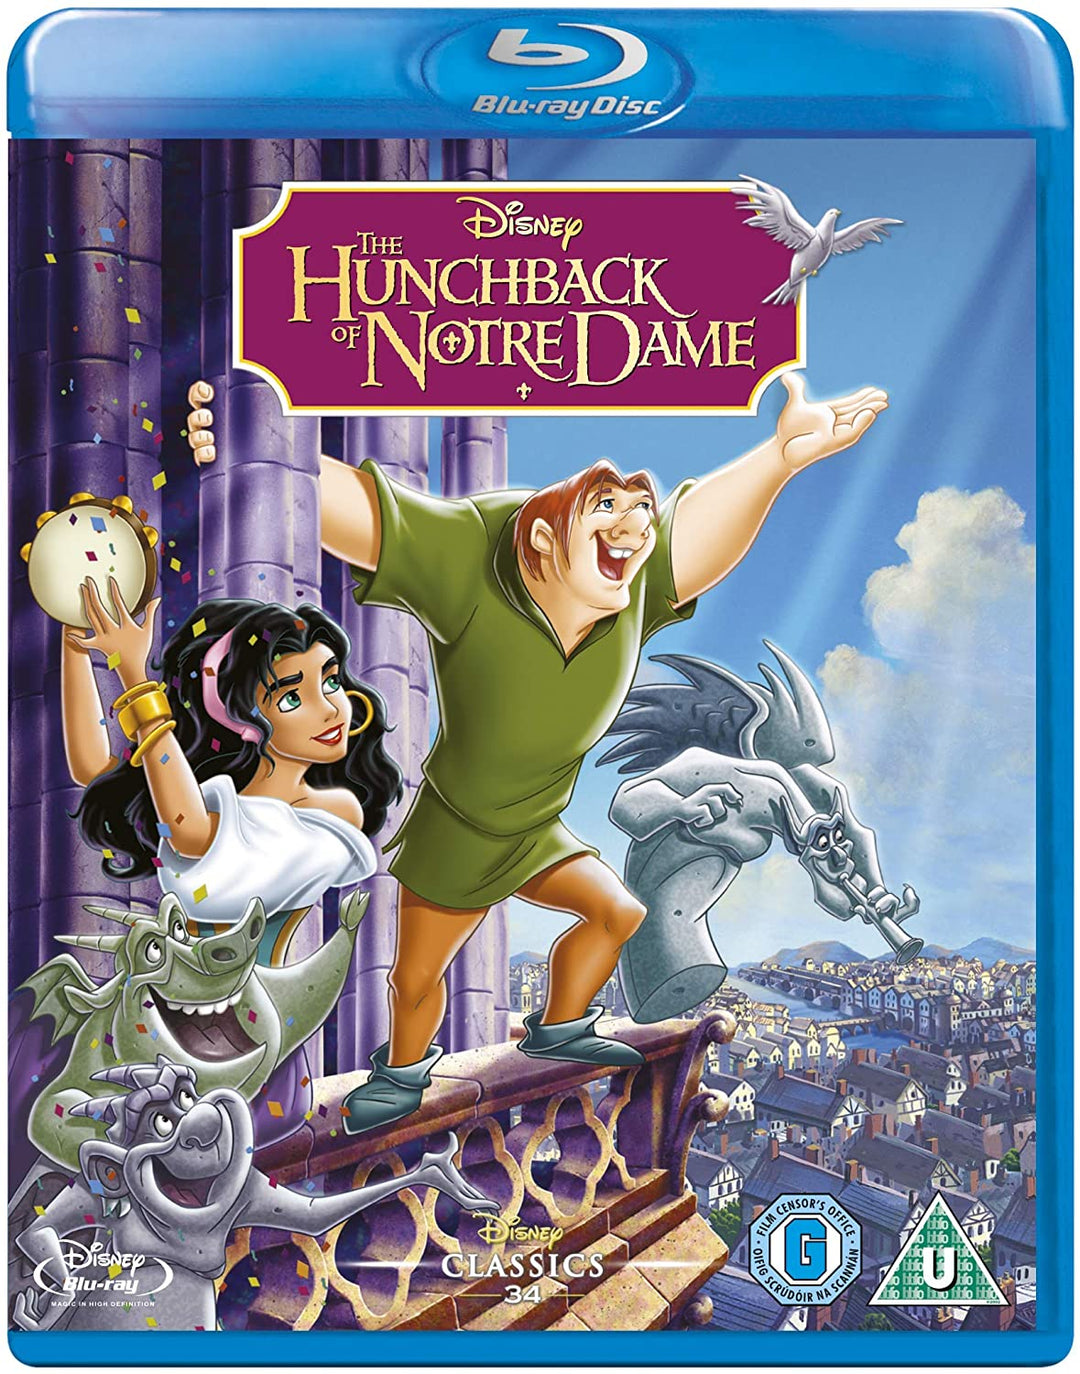 The Hunchback of Notre Dame [Blu-ray] [1996] [Region Free]